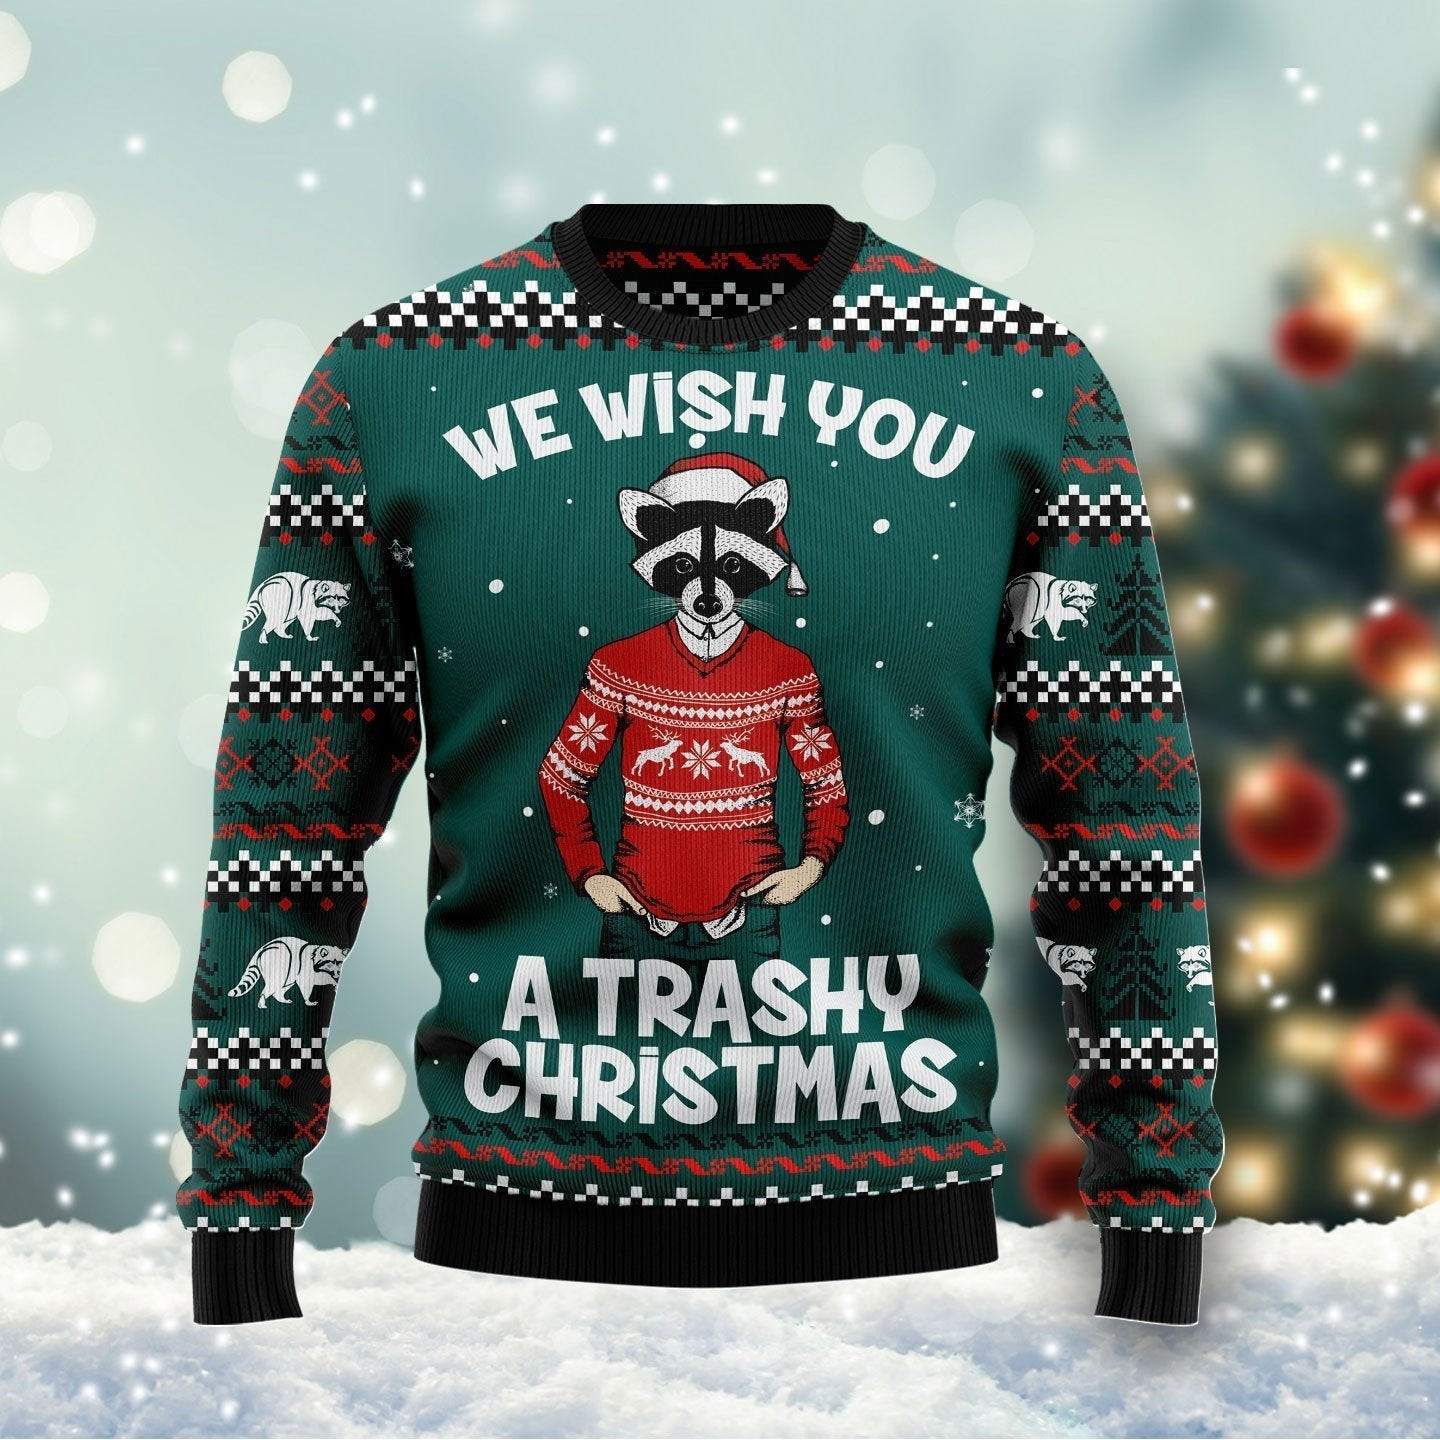 A Trashy Christmas Ugly Christmas Sweater Ugly Sweater For Men Women, Holiday Sweater